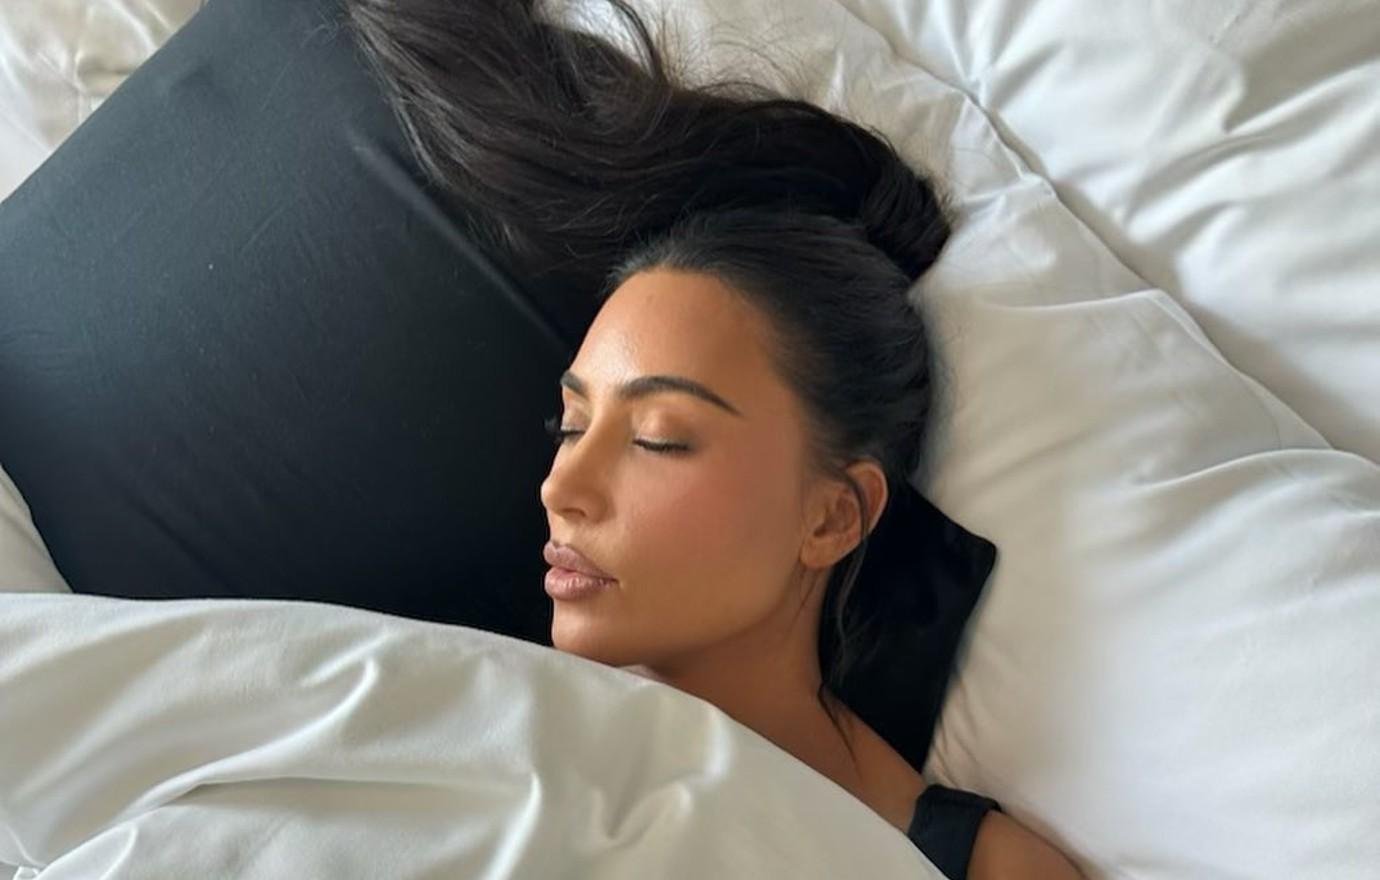 Kim Kardashian faces online backlash after she introduces a new Skims  maternity line